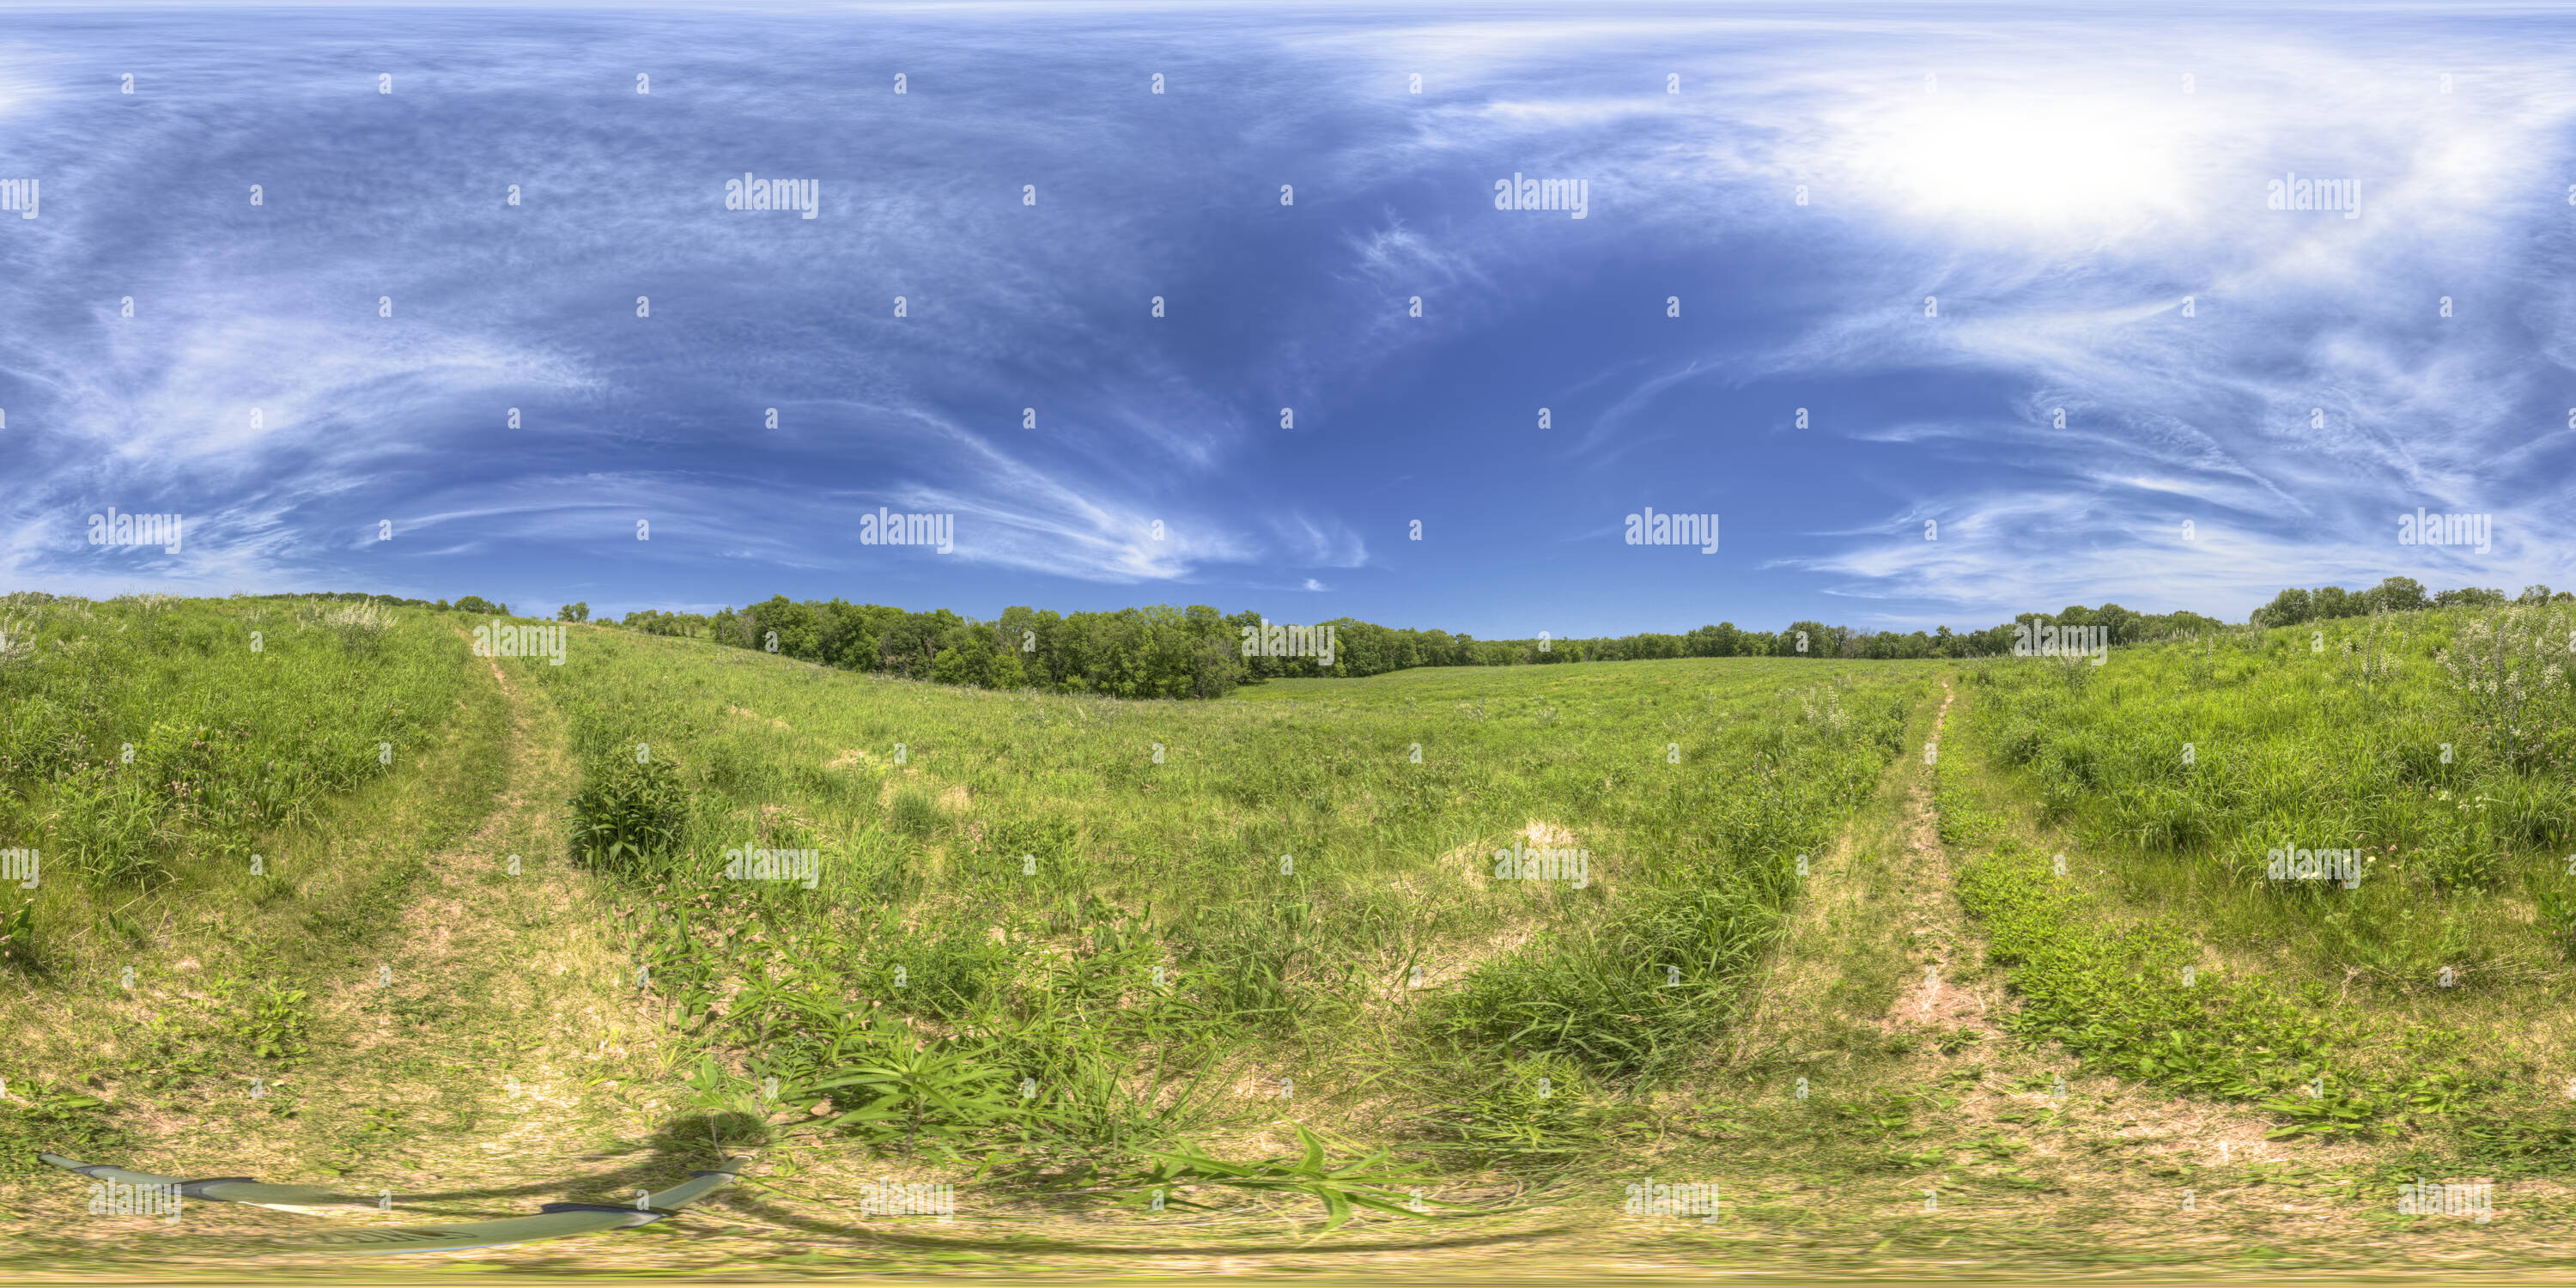 360° view of Ice Age Trail: Table Bluff Segment - Along the Trail